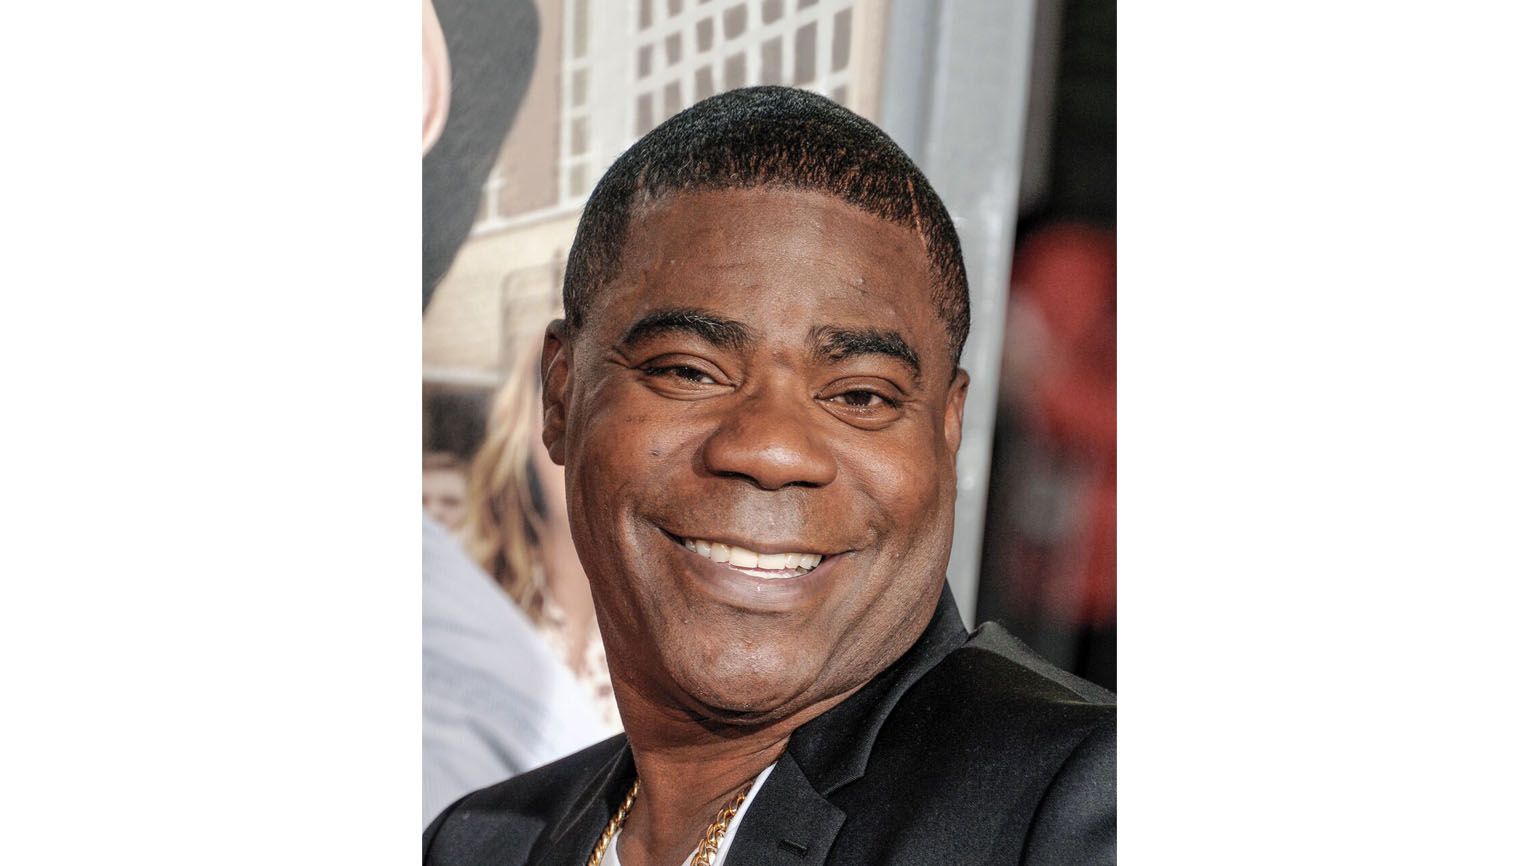 Actor Tracy Morgan arrives at the premiere of Warner Bros. Pictures' "Fist Fight" at Regency Village Theatre on February 13, 2017 in Westwood, California. Credit: Gregg DeGuire/WireImage/Getty Images